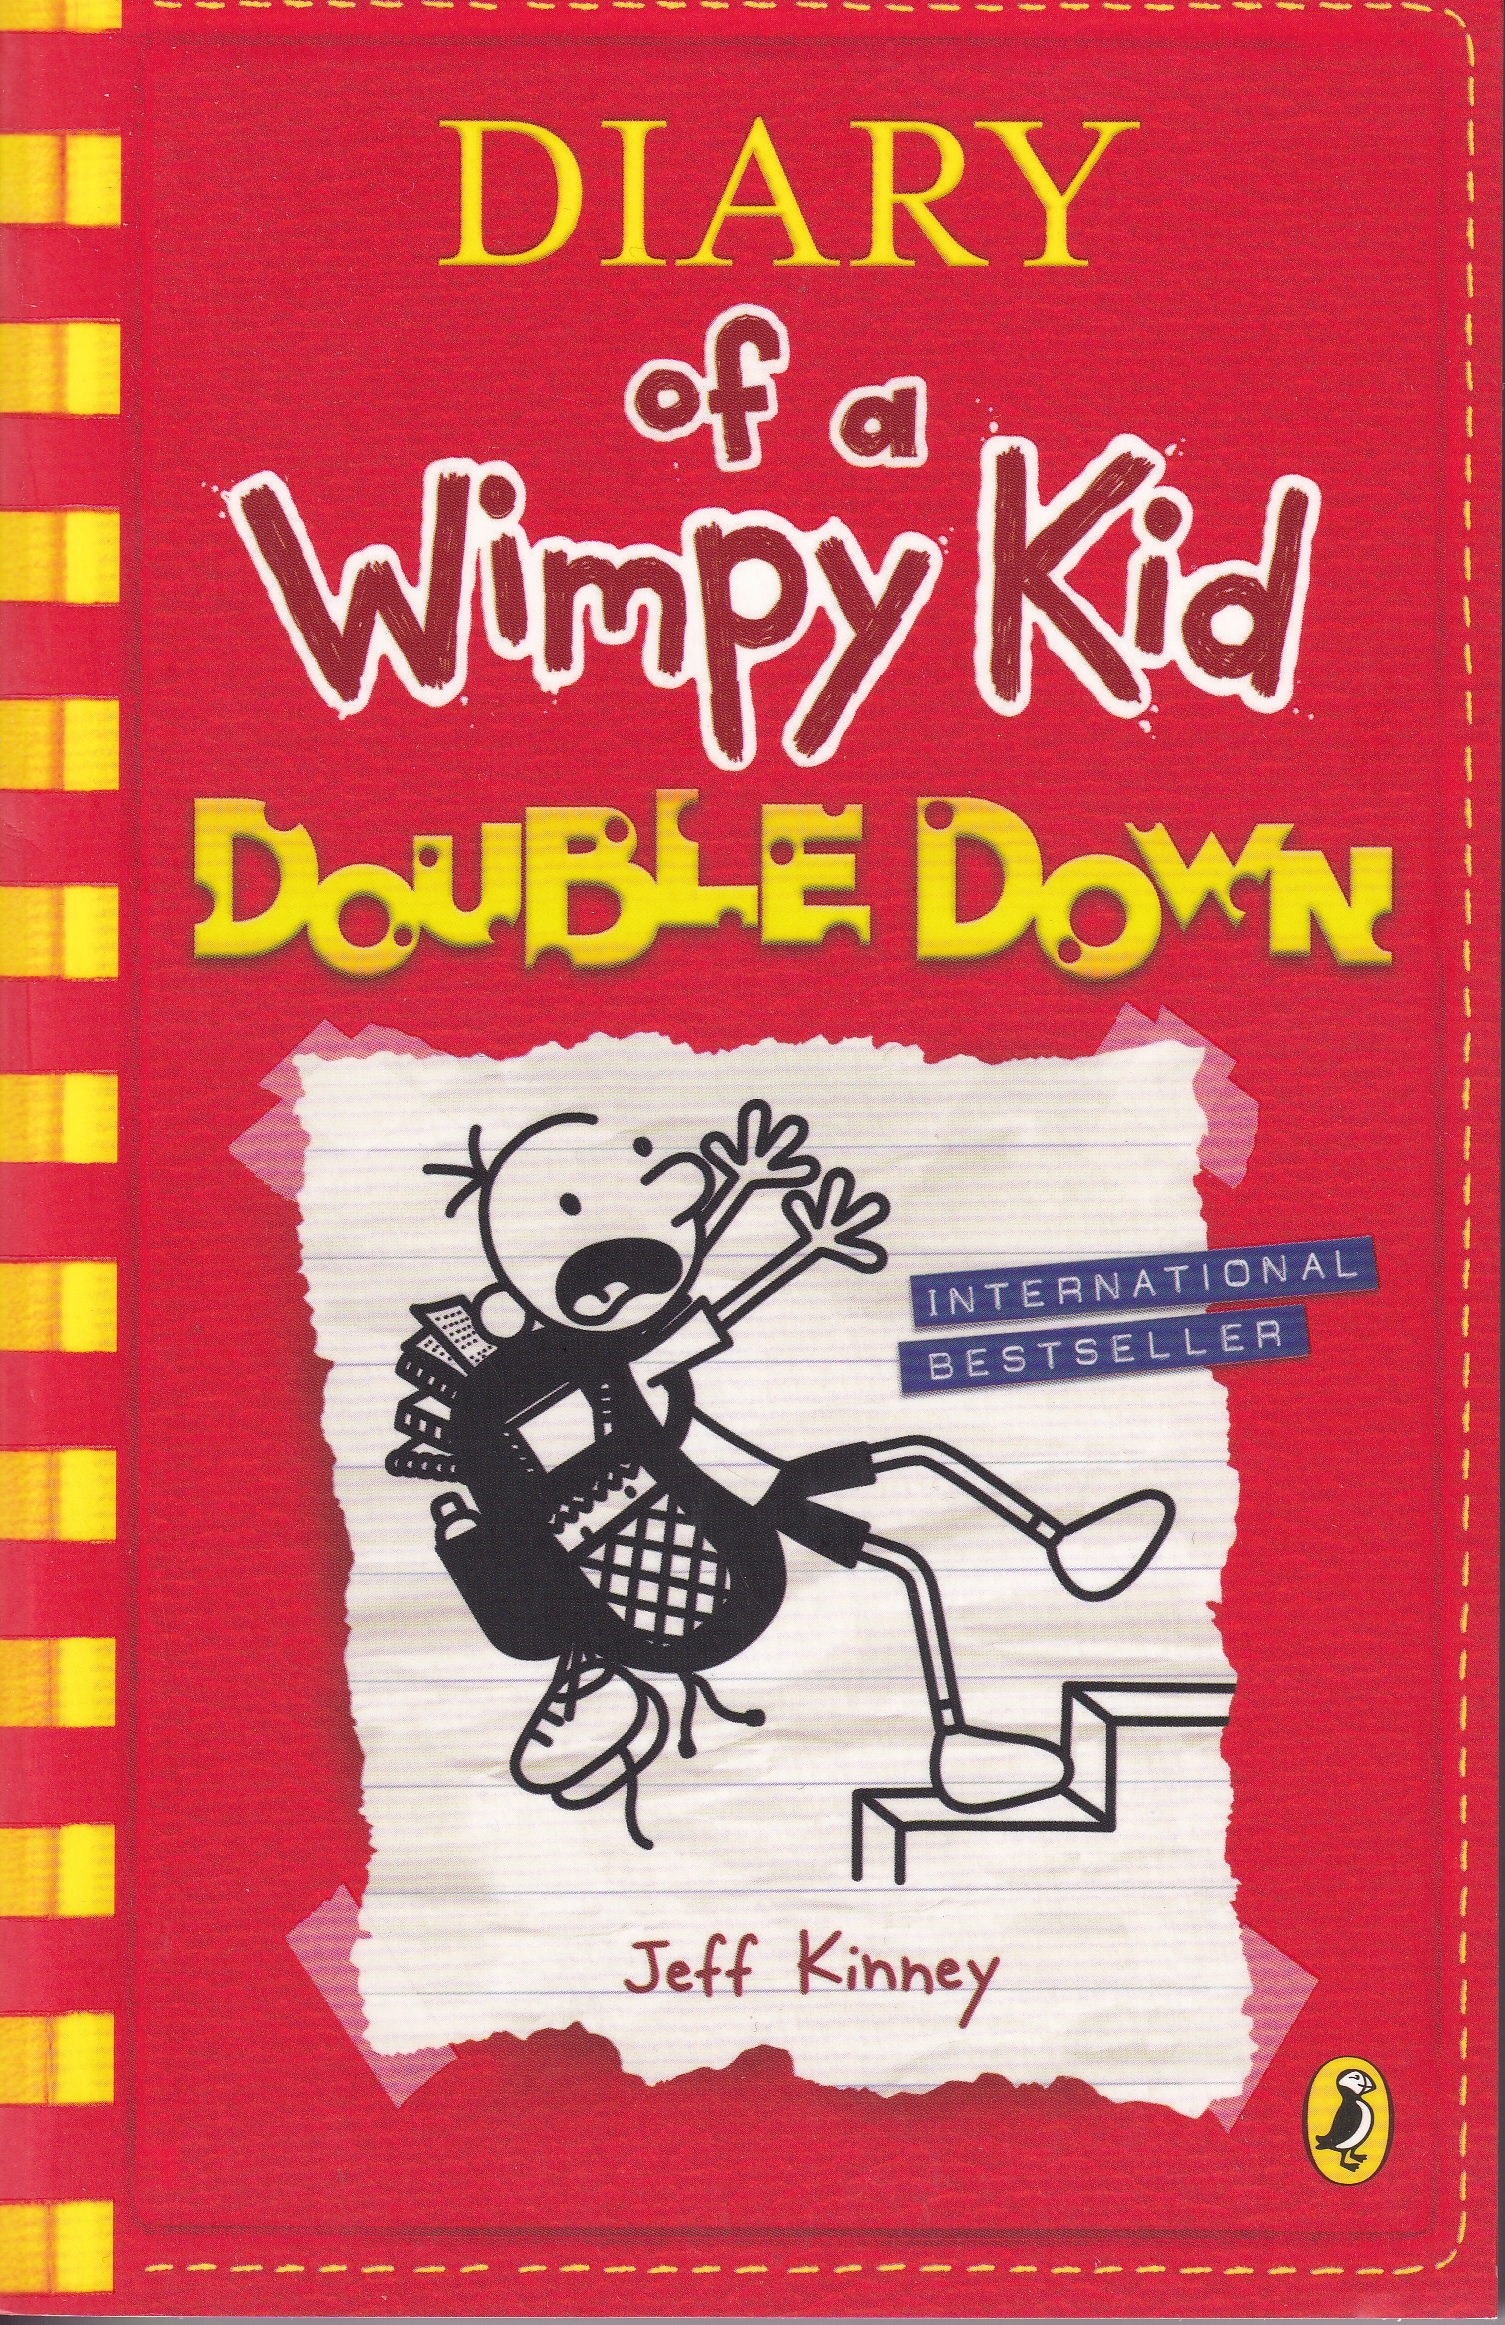 Jeff Kinney - DIARY OF A WIMPY KID - DOUBLE DOWN